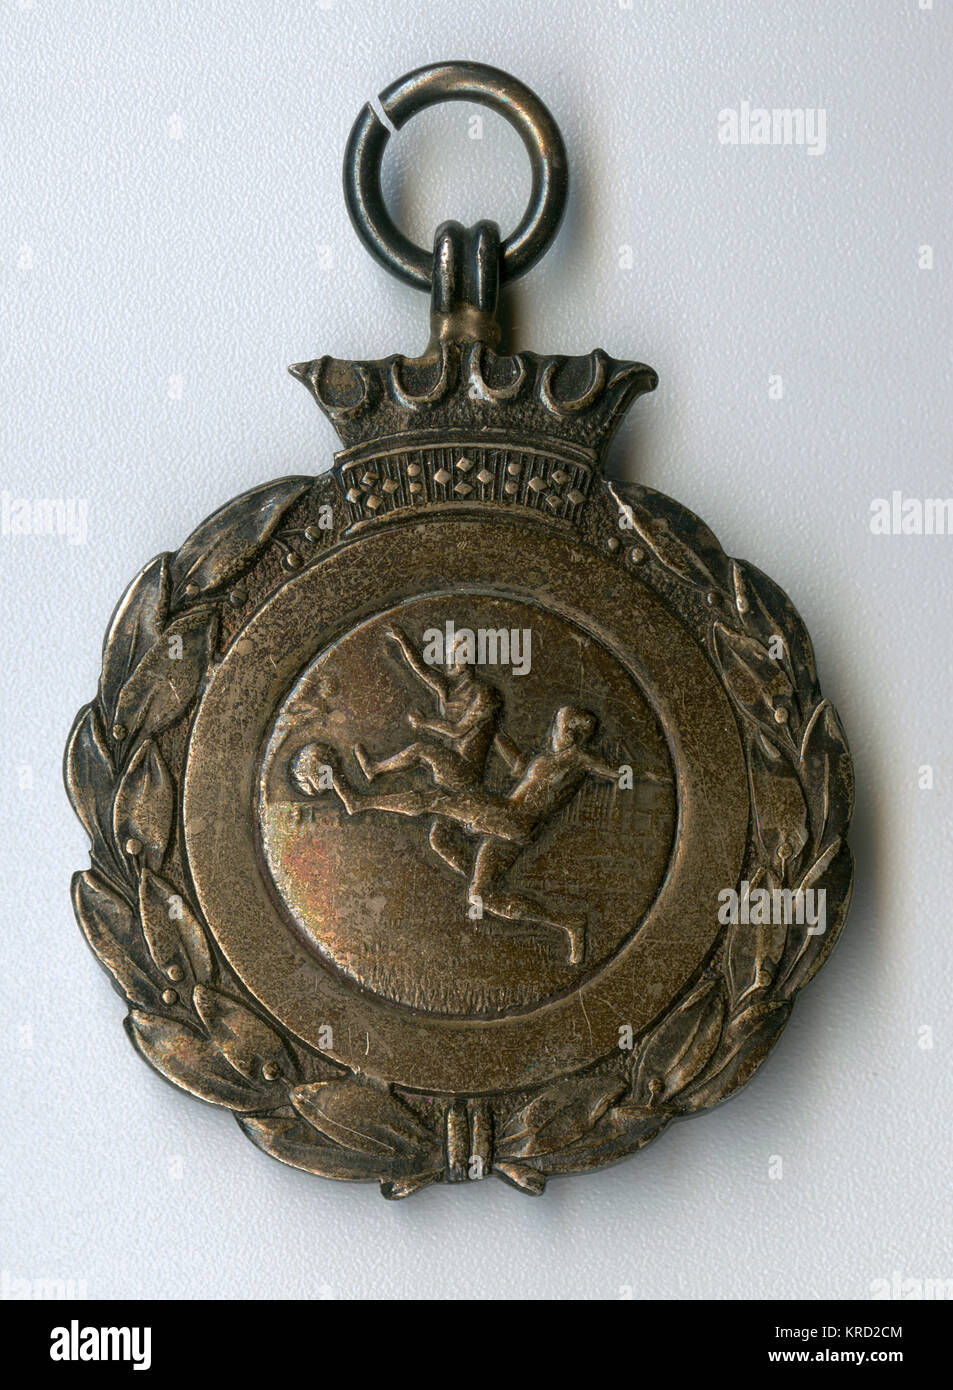 Football medal, with an image of two men playing football at the centre, a crown above, and a laurel wreath design round the edge.       Date: early 20th century Stock Photo